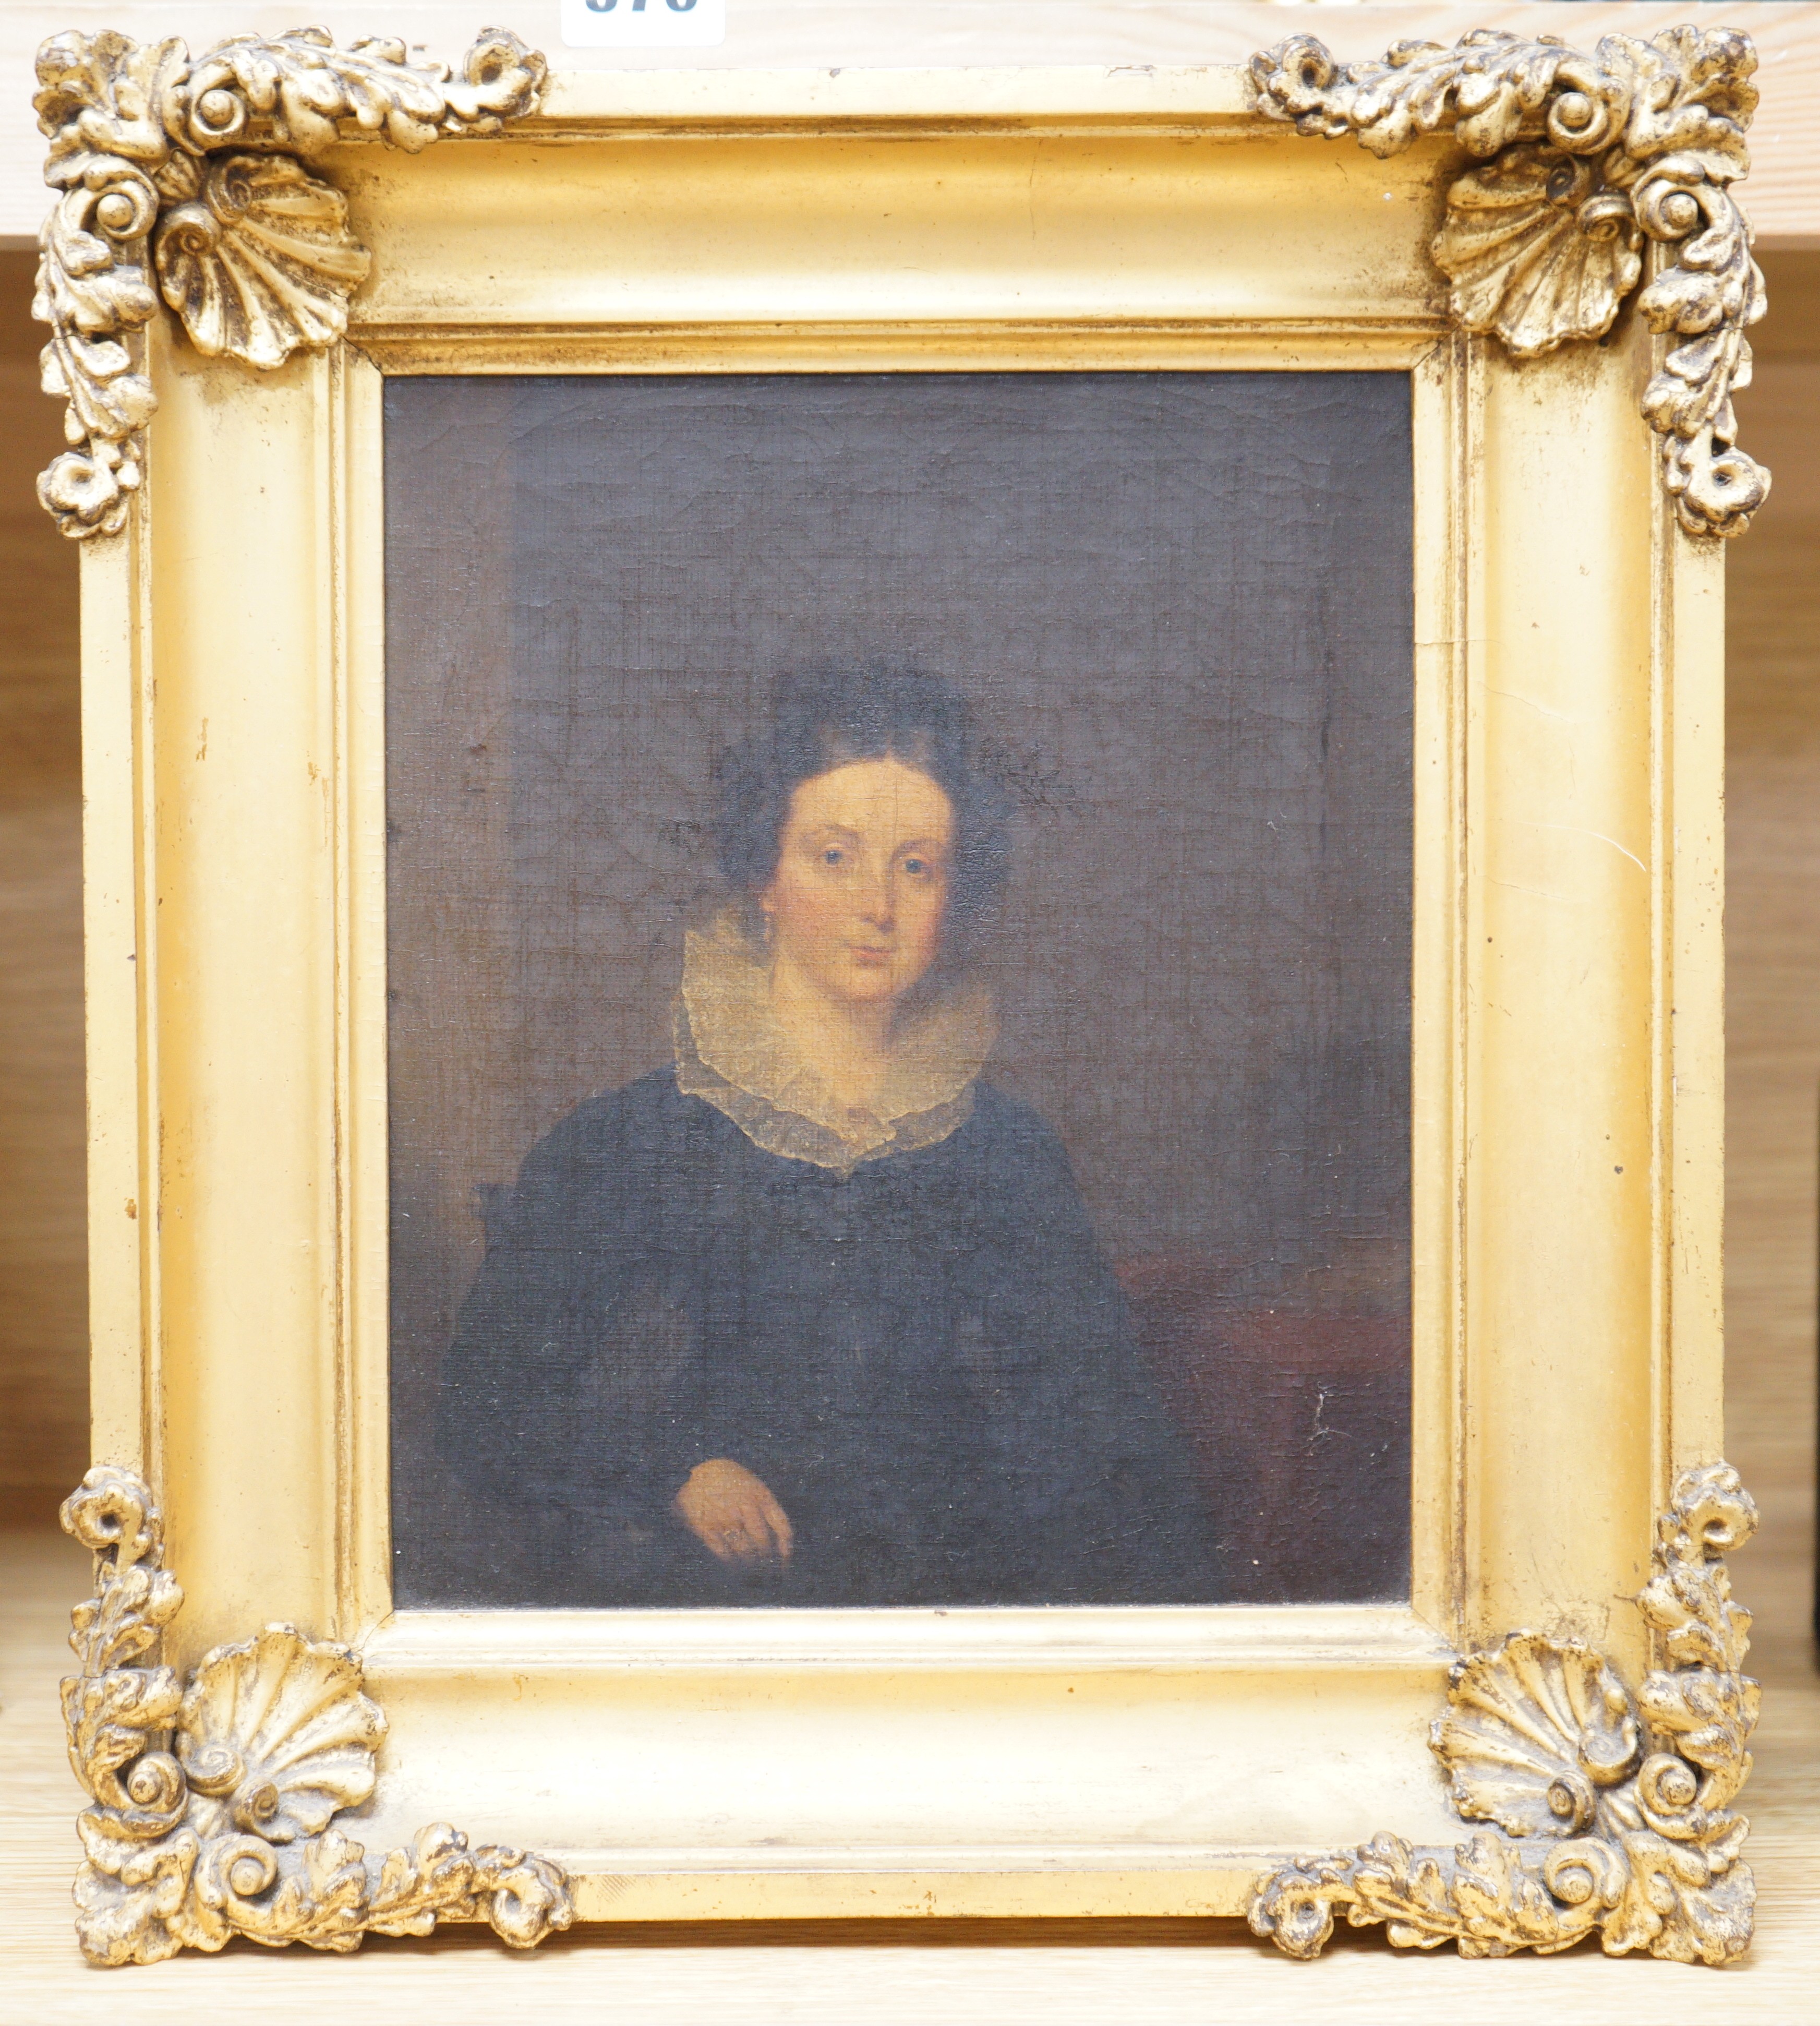 19th century Continental School, oil on canvas, Portrait of a lady wearing a lace collar, 24 x 20cm